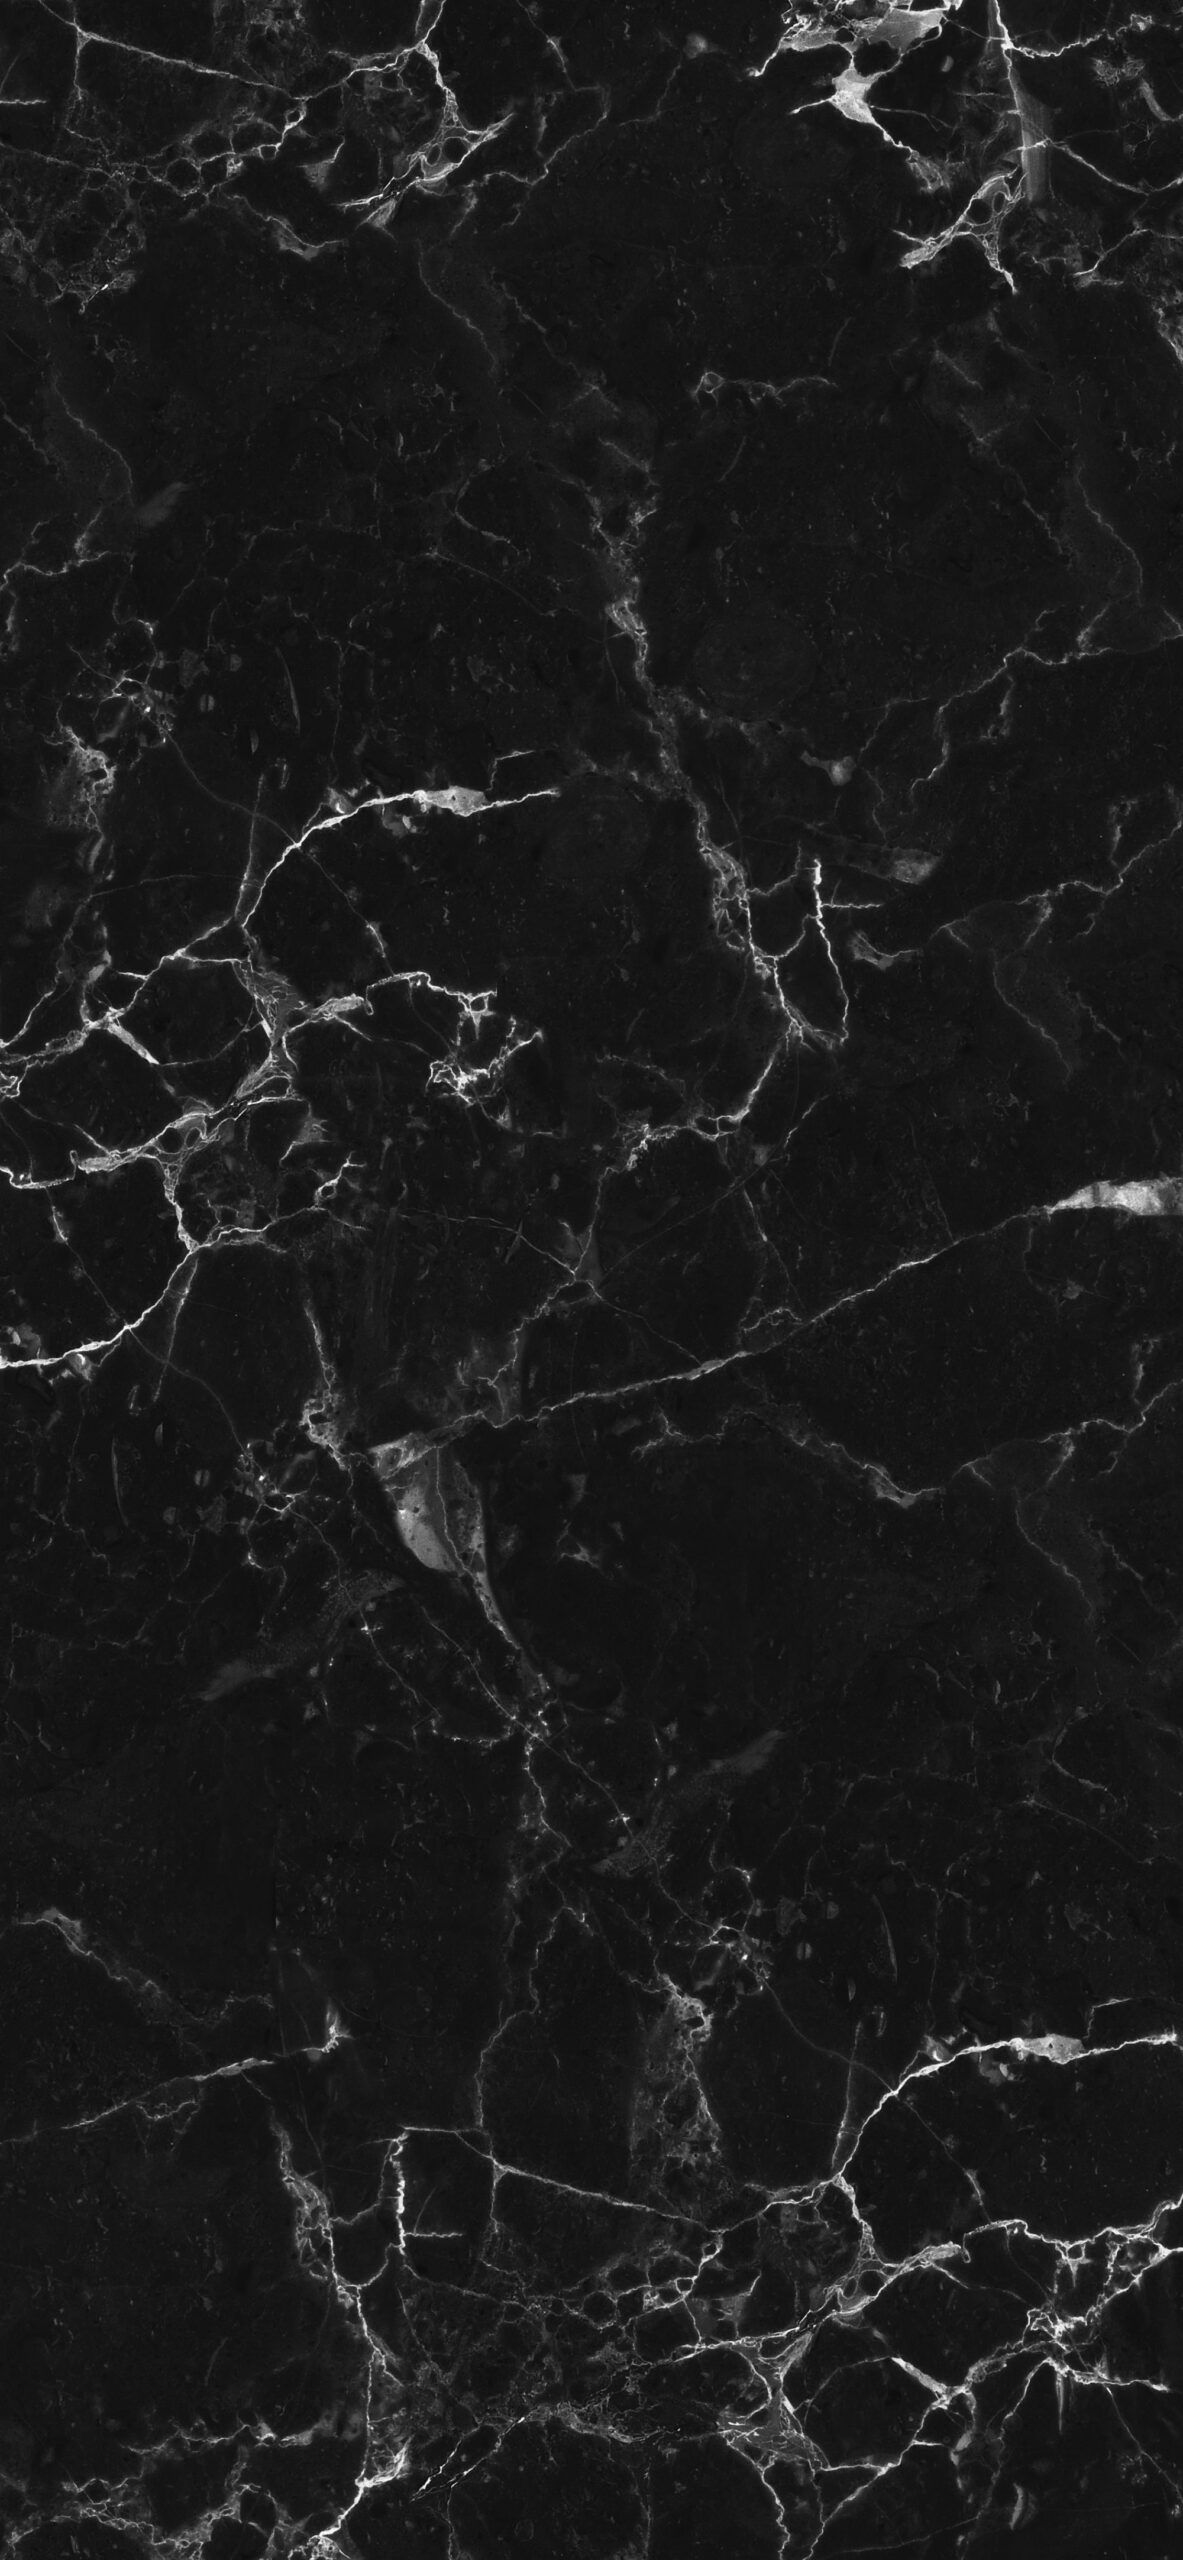 A black and white photo of a marble floor - Marble